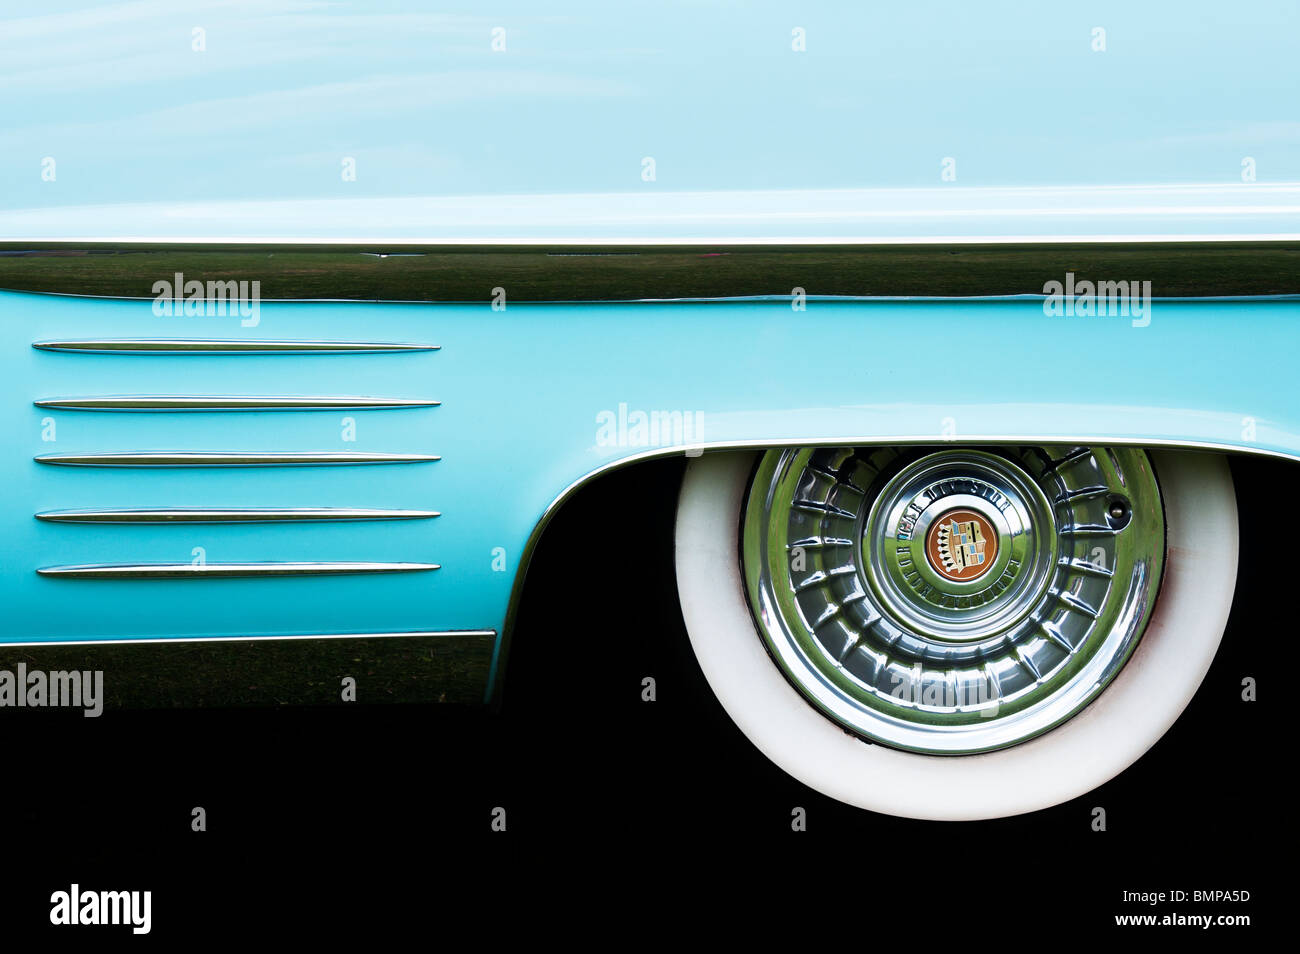 1958 Cadillac rear wheel arch abstract. Classic American car Stock Photo